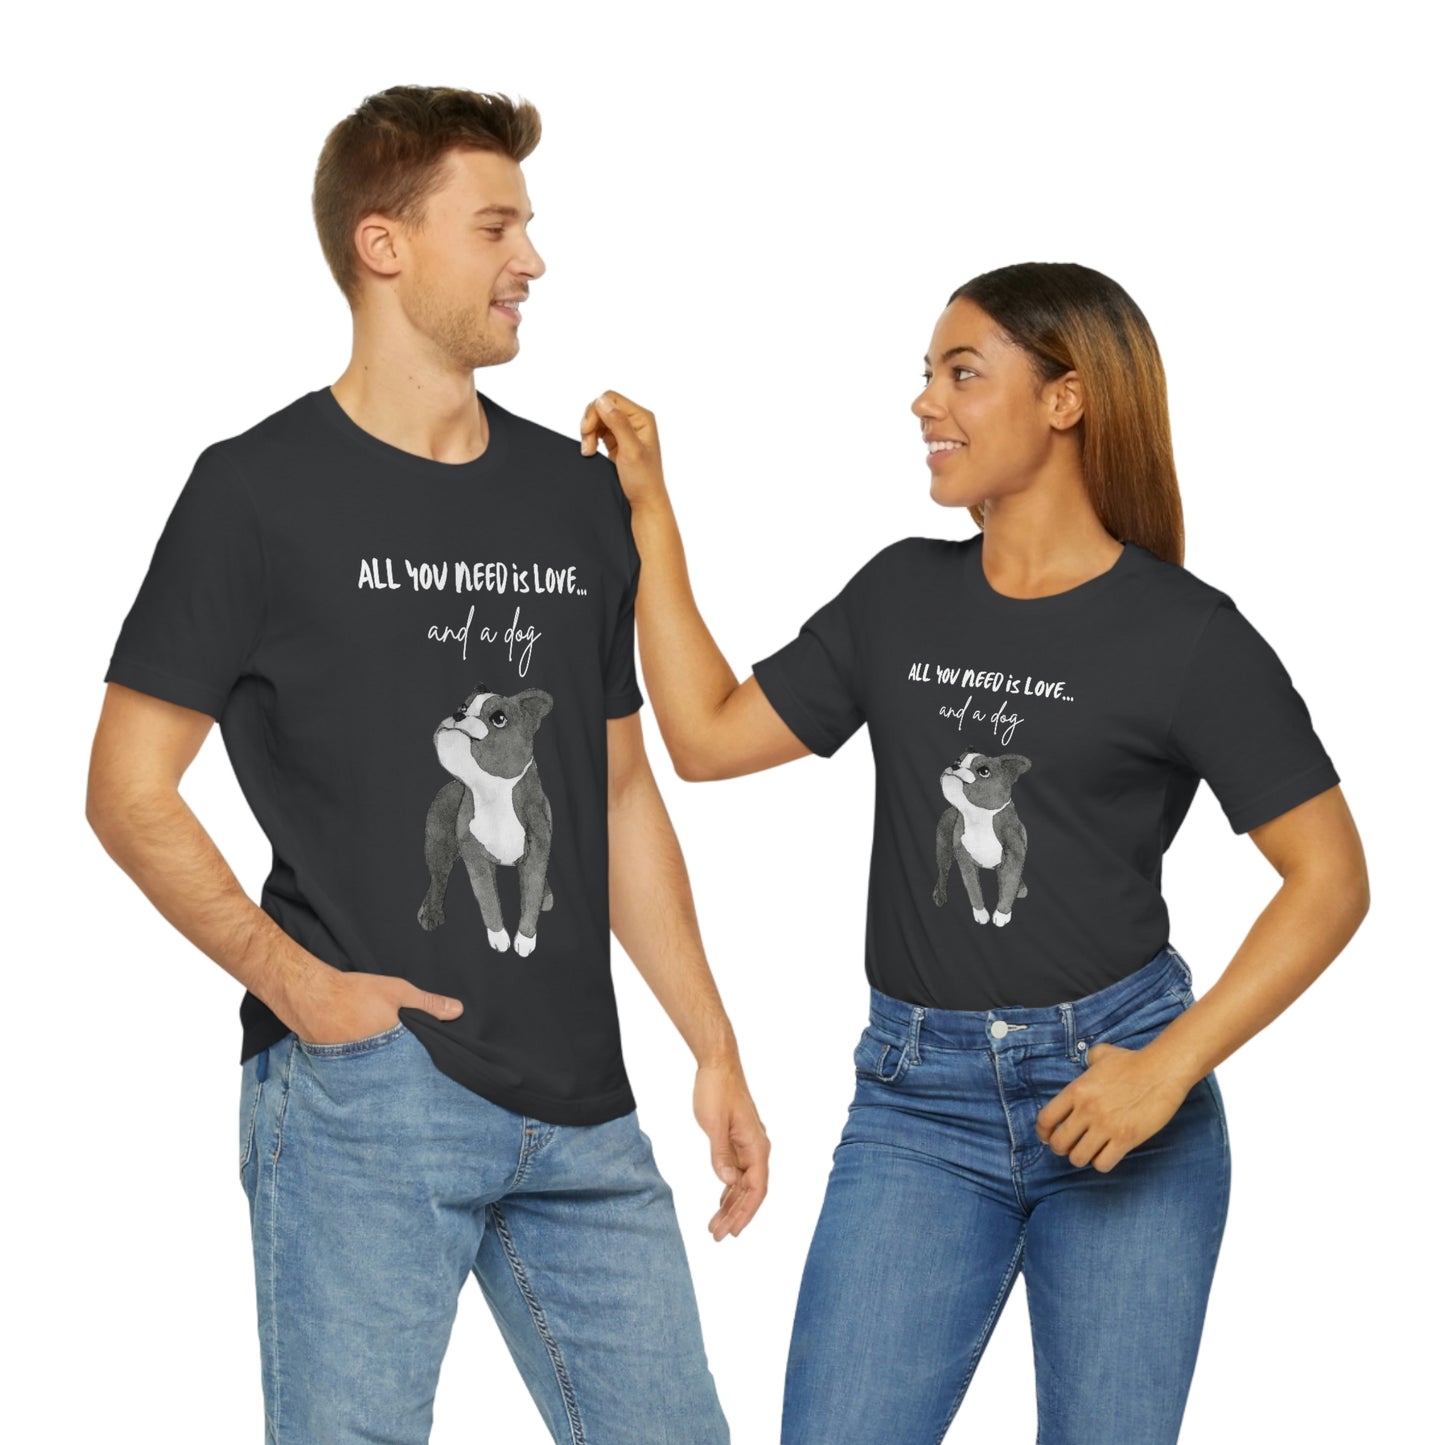 All You Need Is Love And A Dog Unisex Jersey Short Sleeve Tee | “Happy Dog” Black Dog Tee Shirt